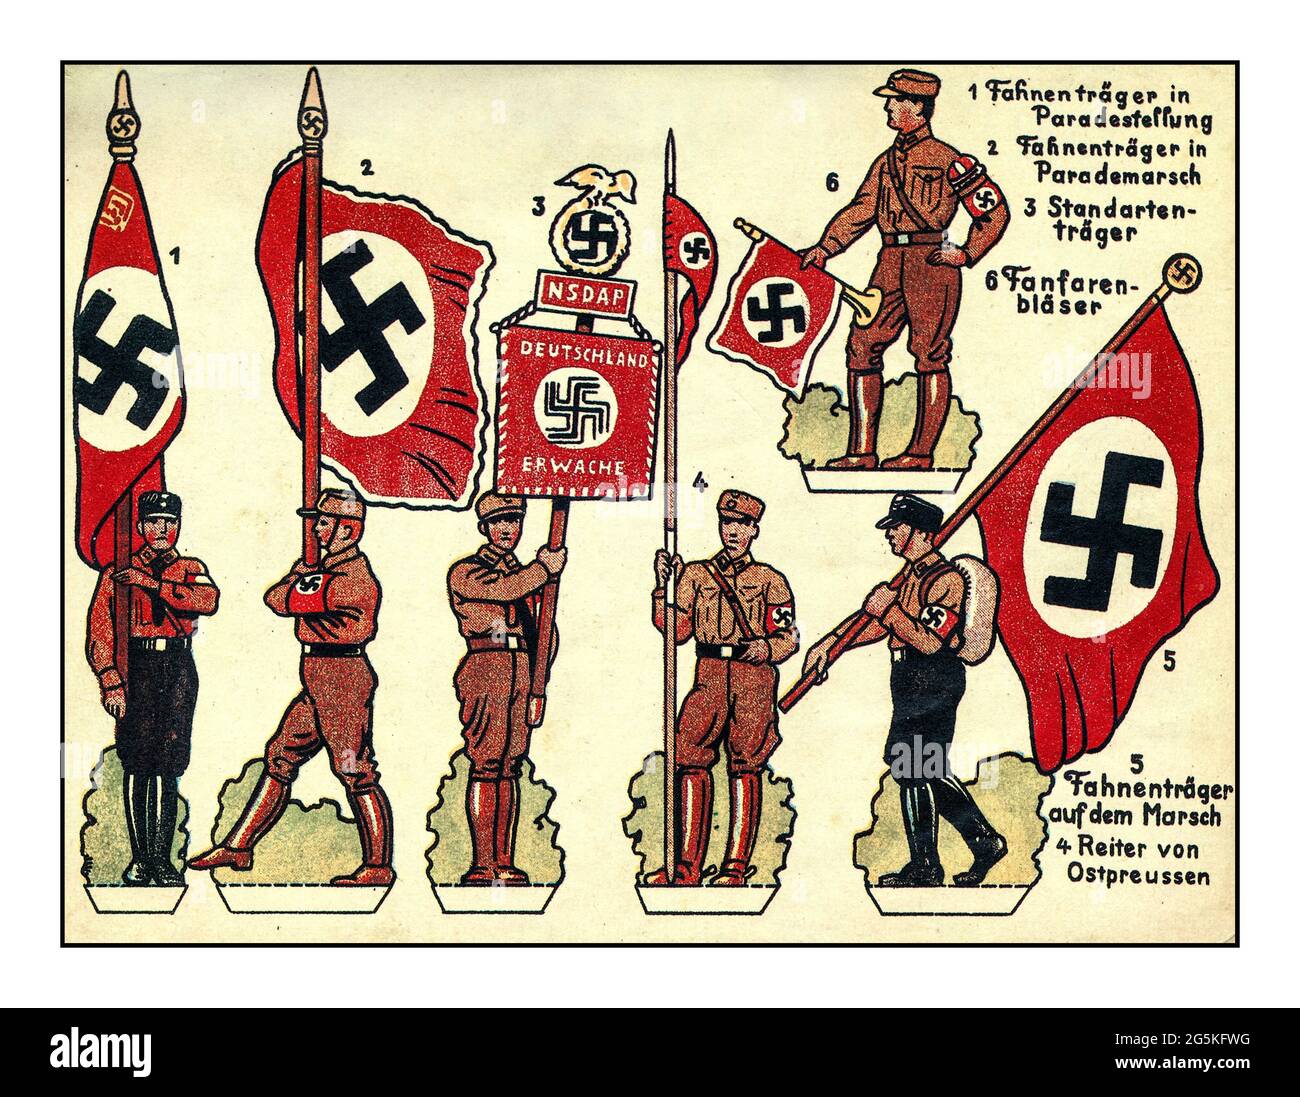 Vintage Nazi Propaganda Cutout paper figures for the various uniforms and standard bearers of the NSDAP with Swastika Flags Nazi Party Family Propaganda 1930's Nazi Germany Stock Photo